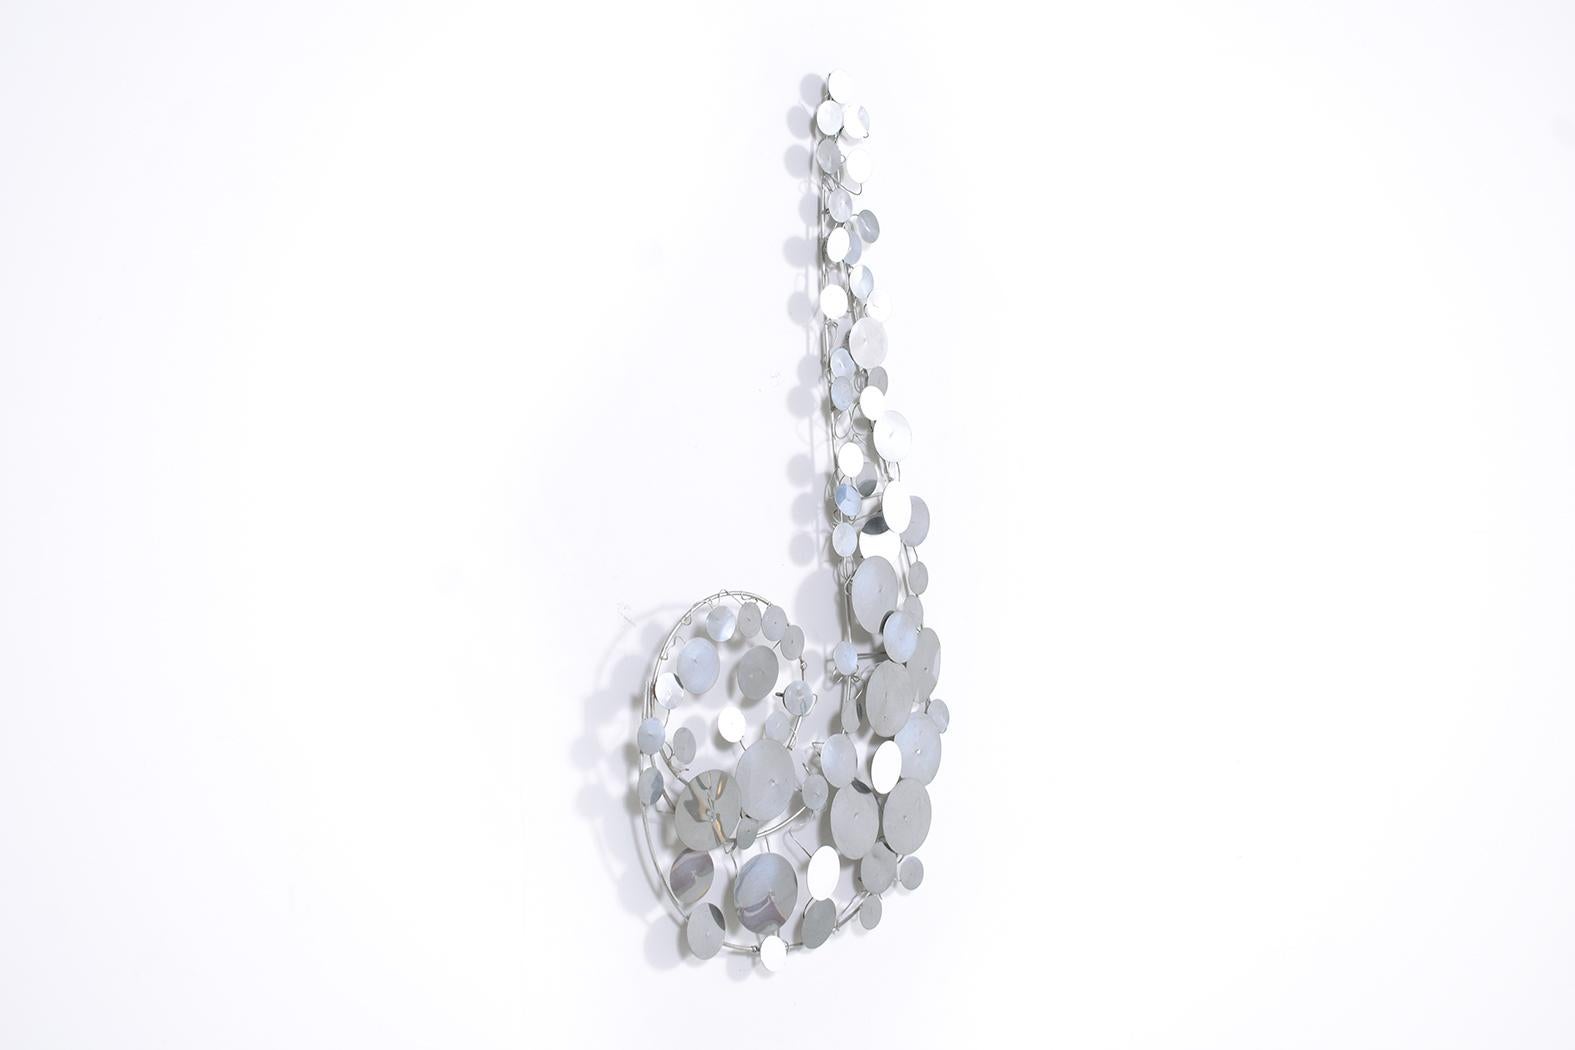 Plated Mid-Century Vintage Steel Sculpture: A Timeless Decorative Wall Art Piece For Sale